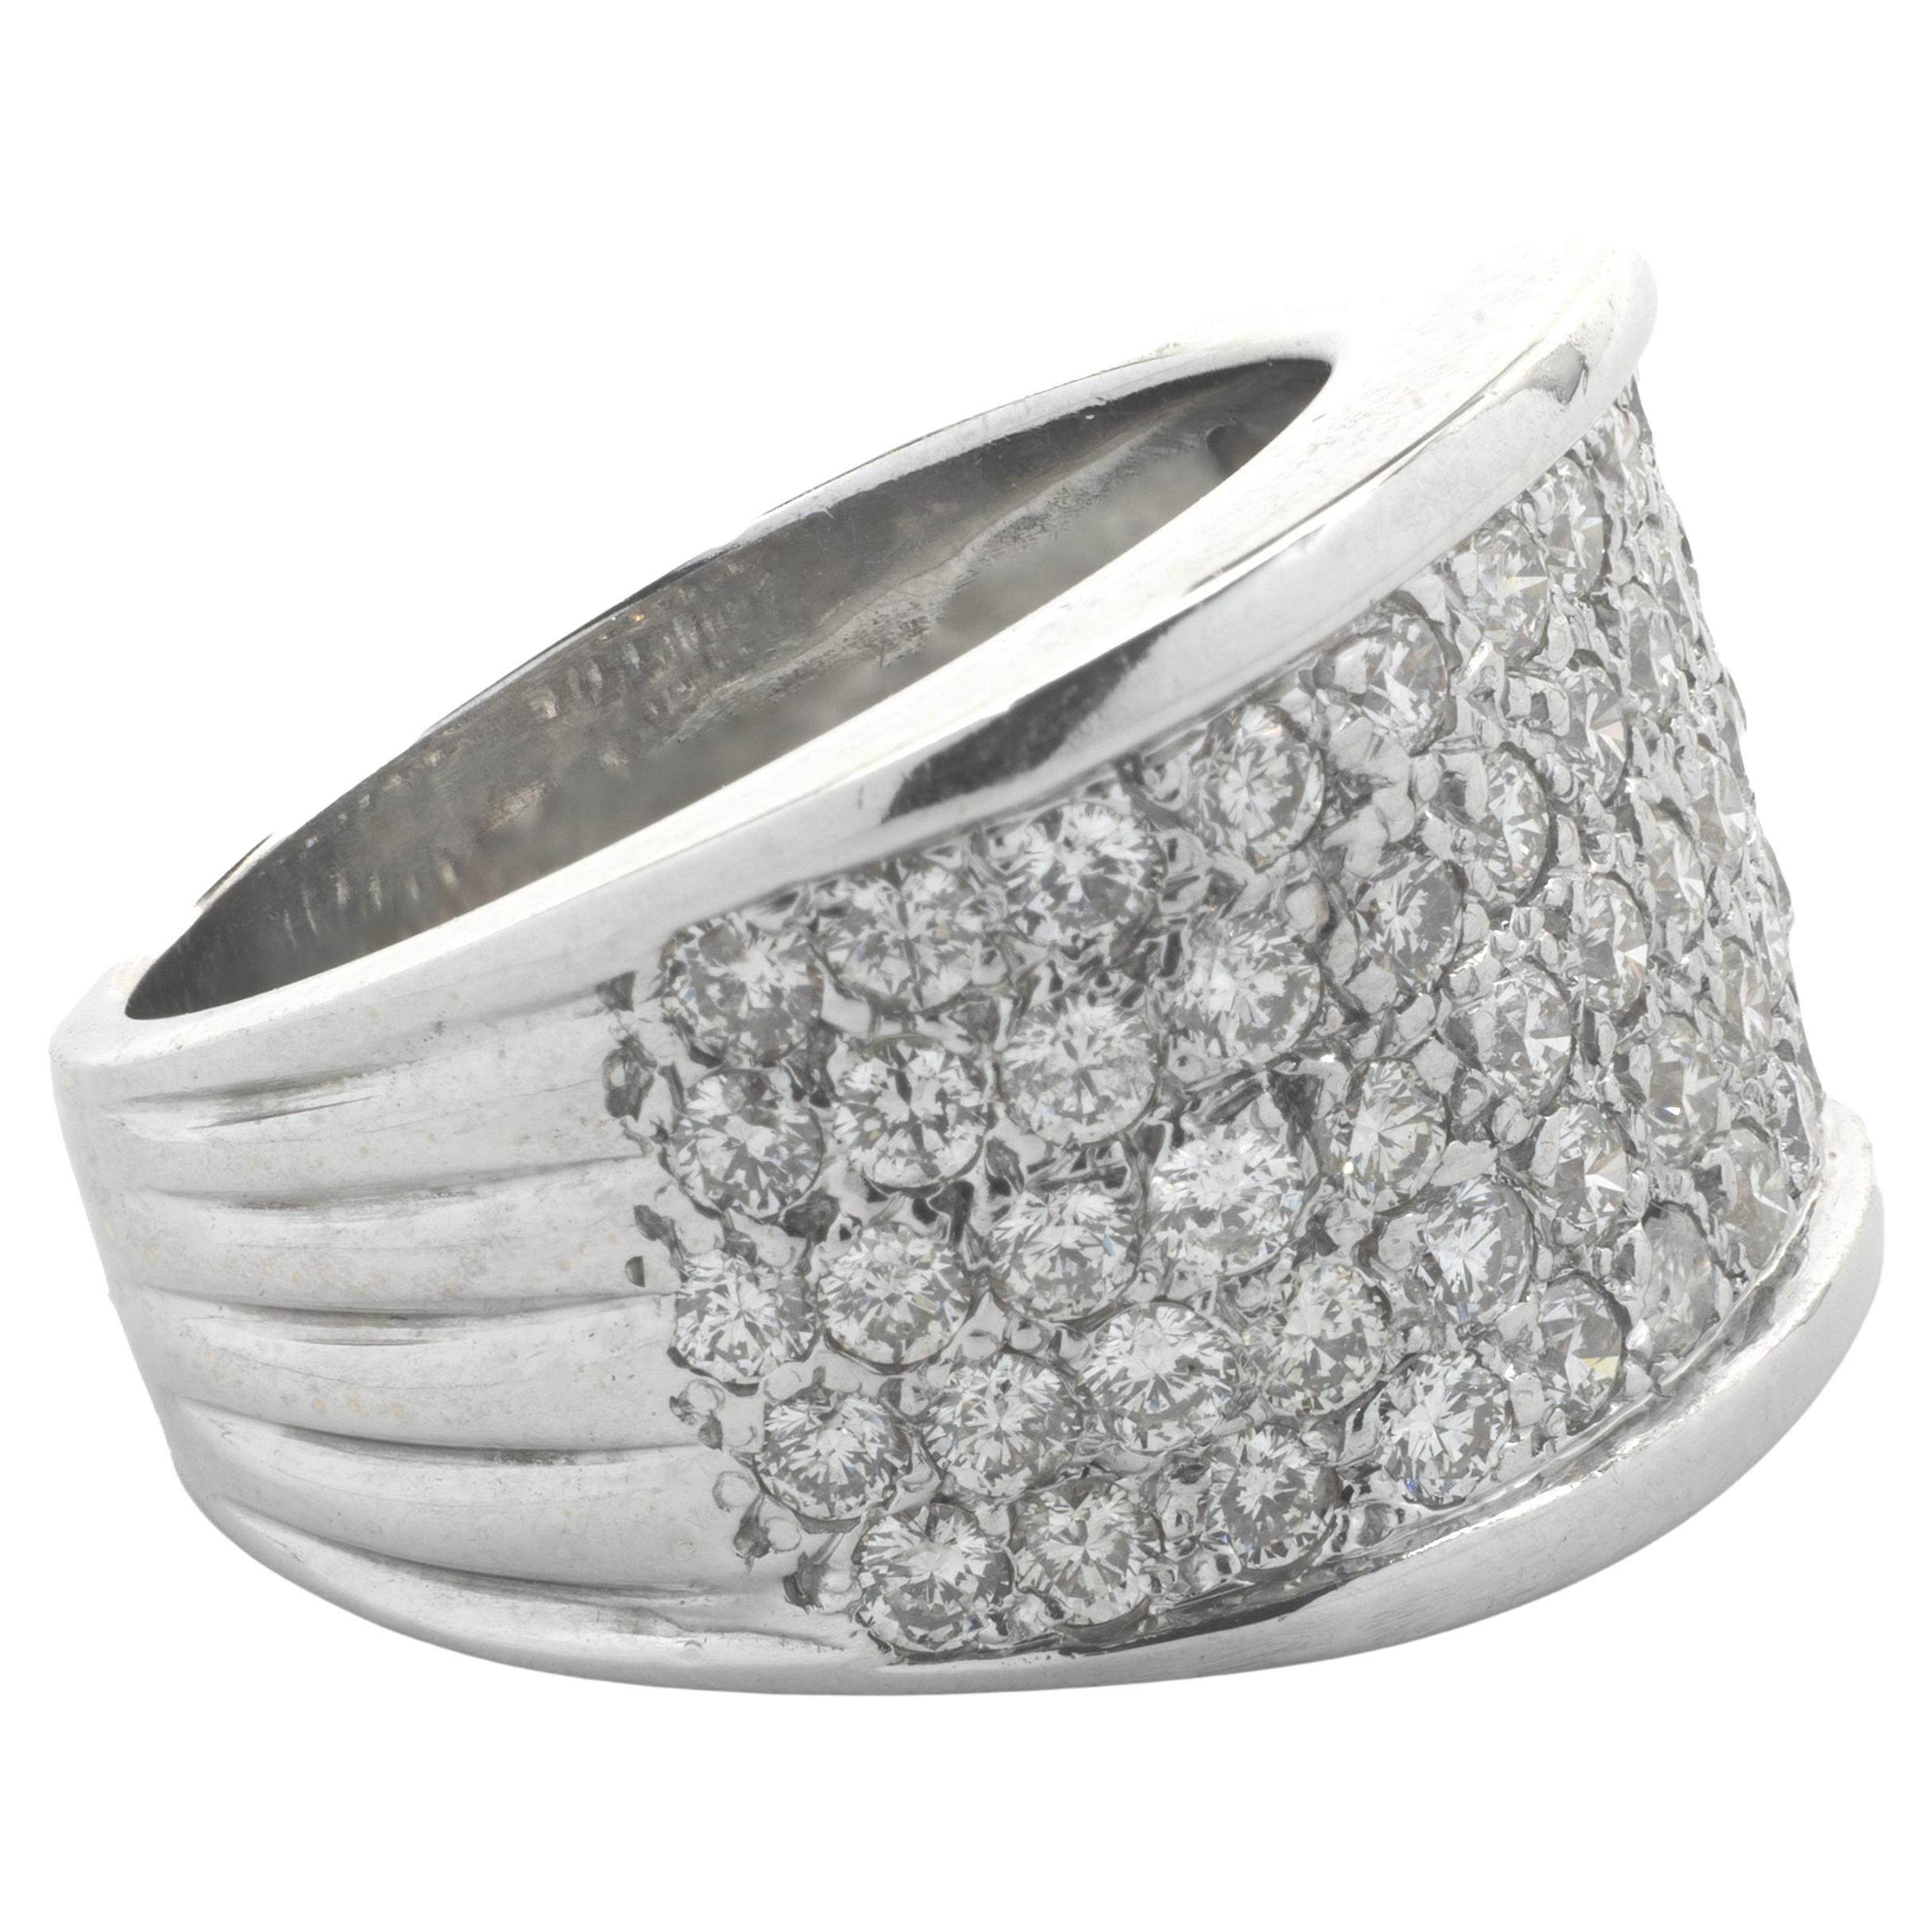 Designer: custom
Material: 18K white gold
Diamond:  58 round brilliant and baguette diamonds= 0.90cttw
Color: I
Clarity: SI1
Ring size: 6.25 (please allow two additional shipping days for sizing requests)
Weight:  2.66 grams
